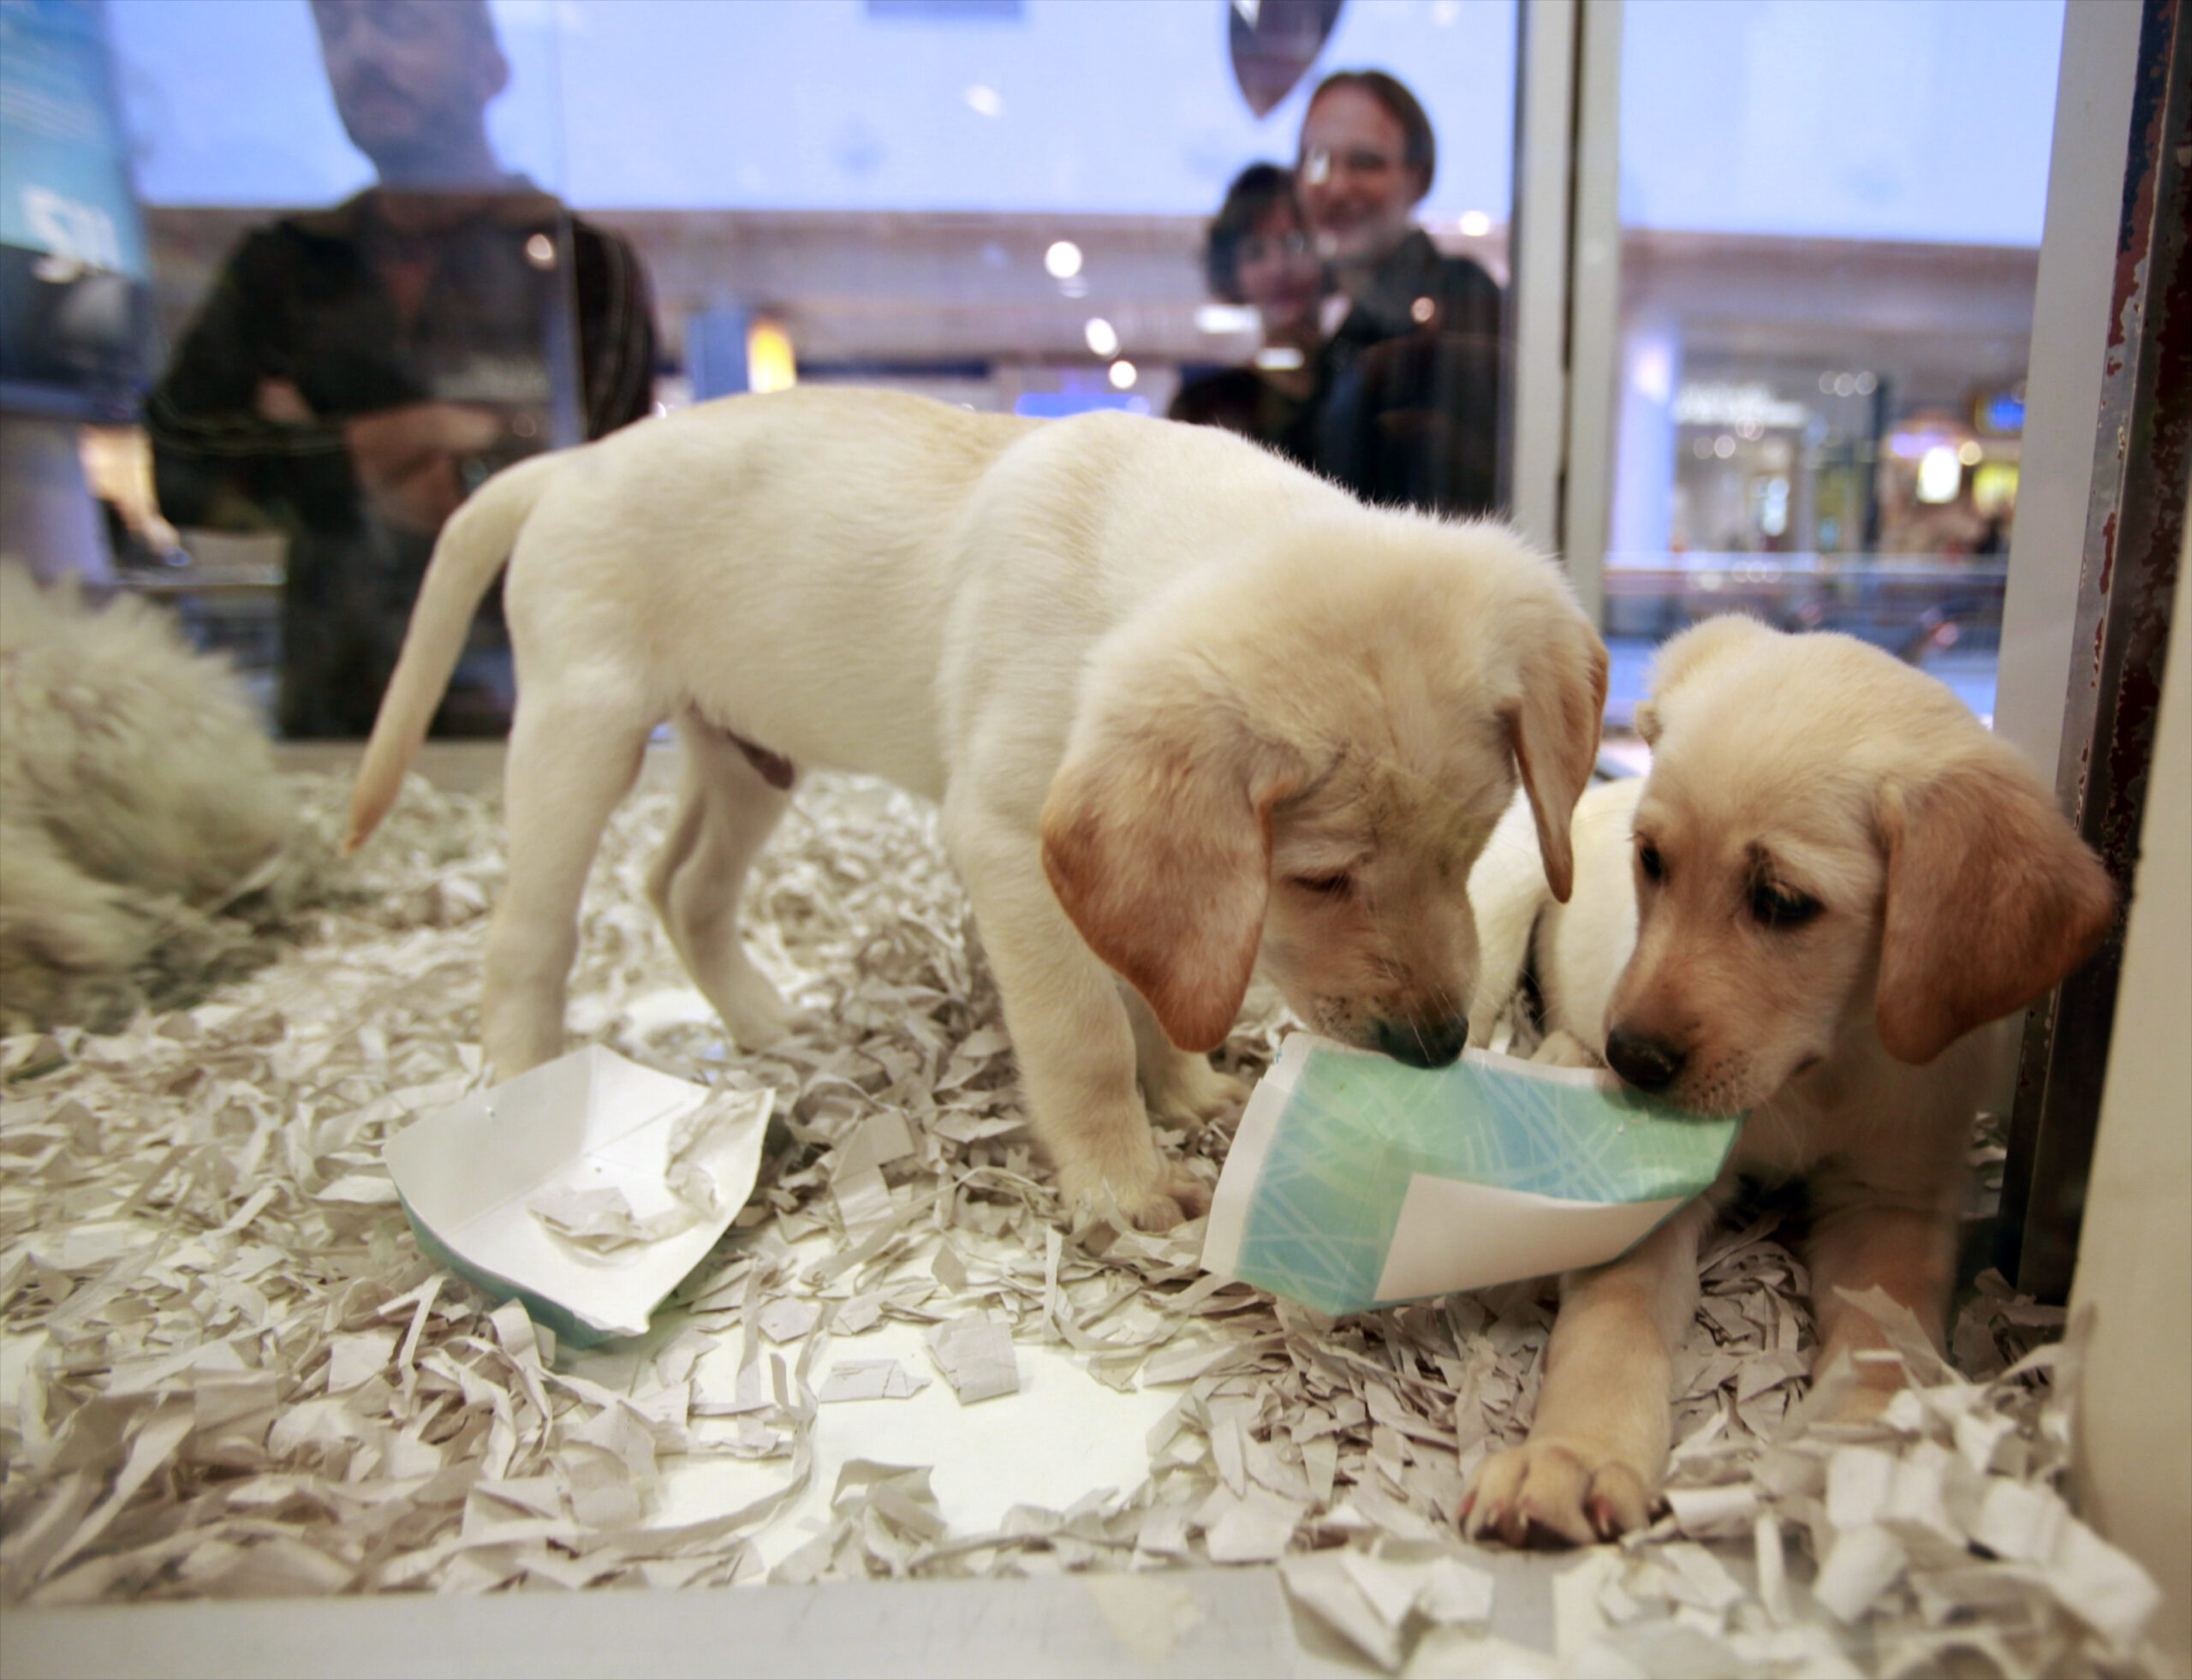 Bill Would Go After Pet Stores That Sell Dogs, Cats